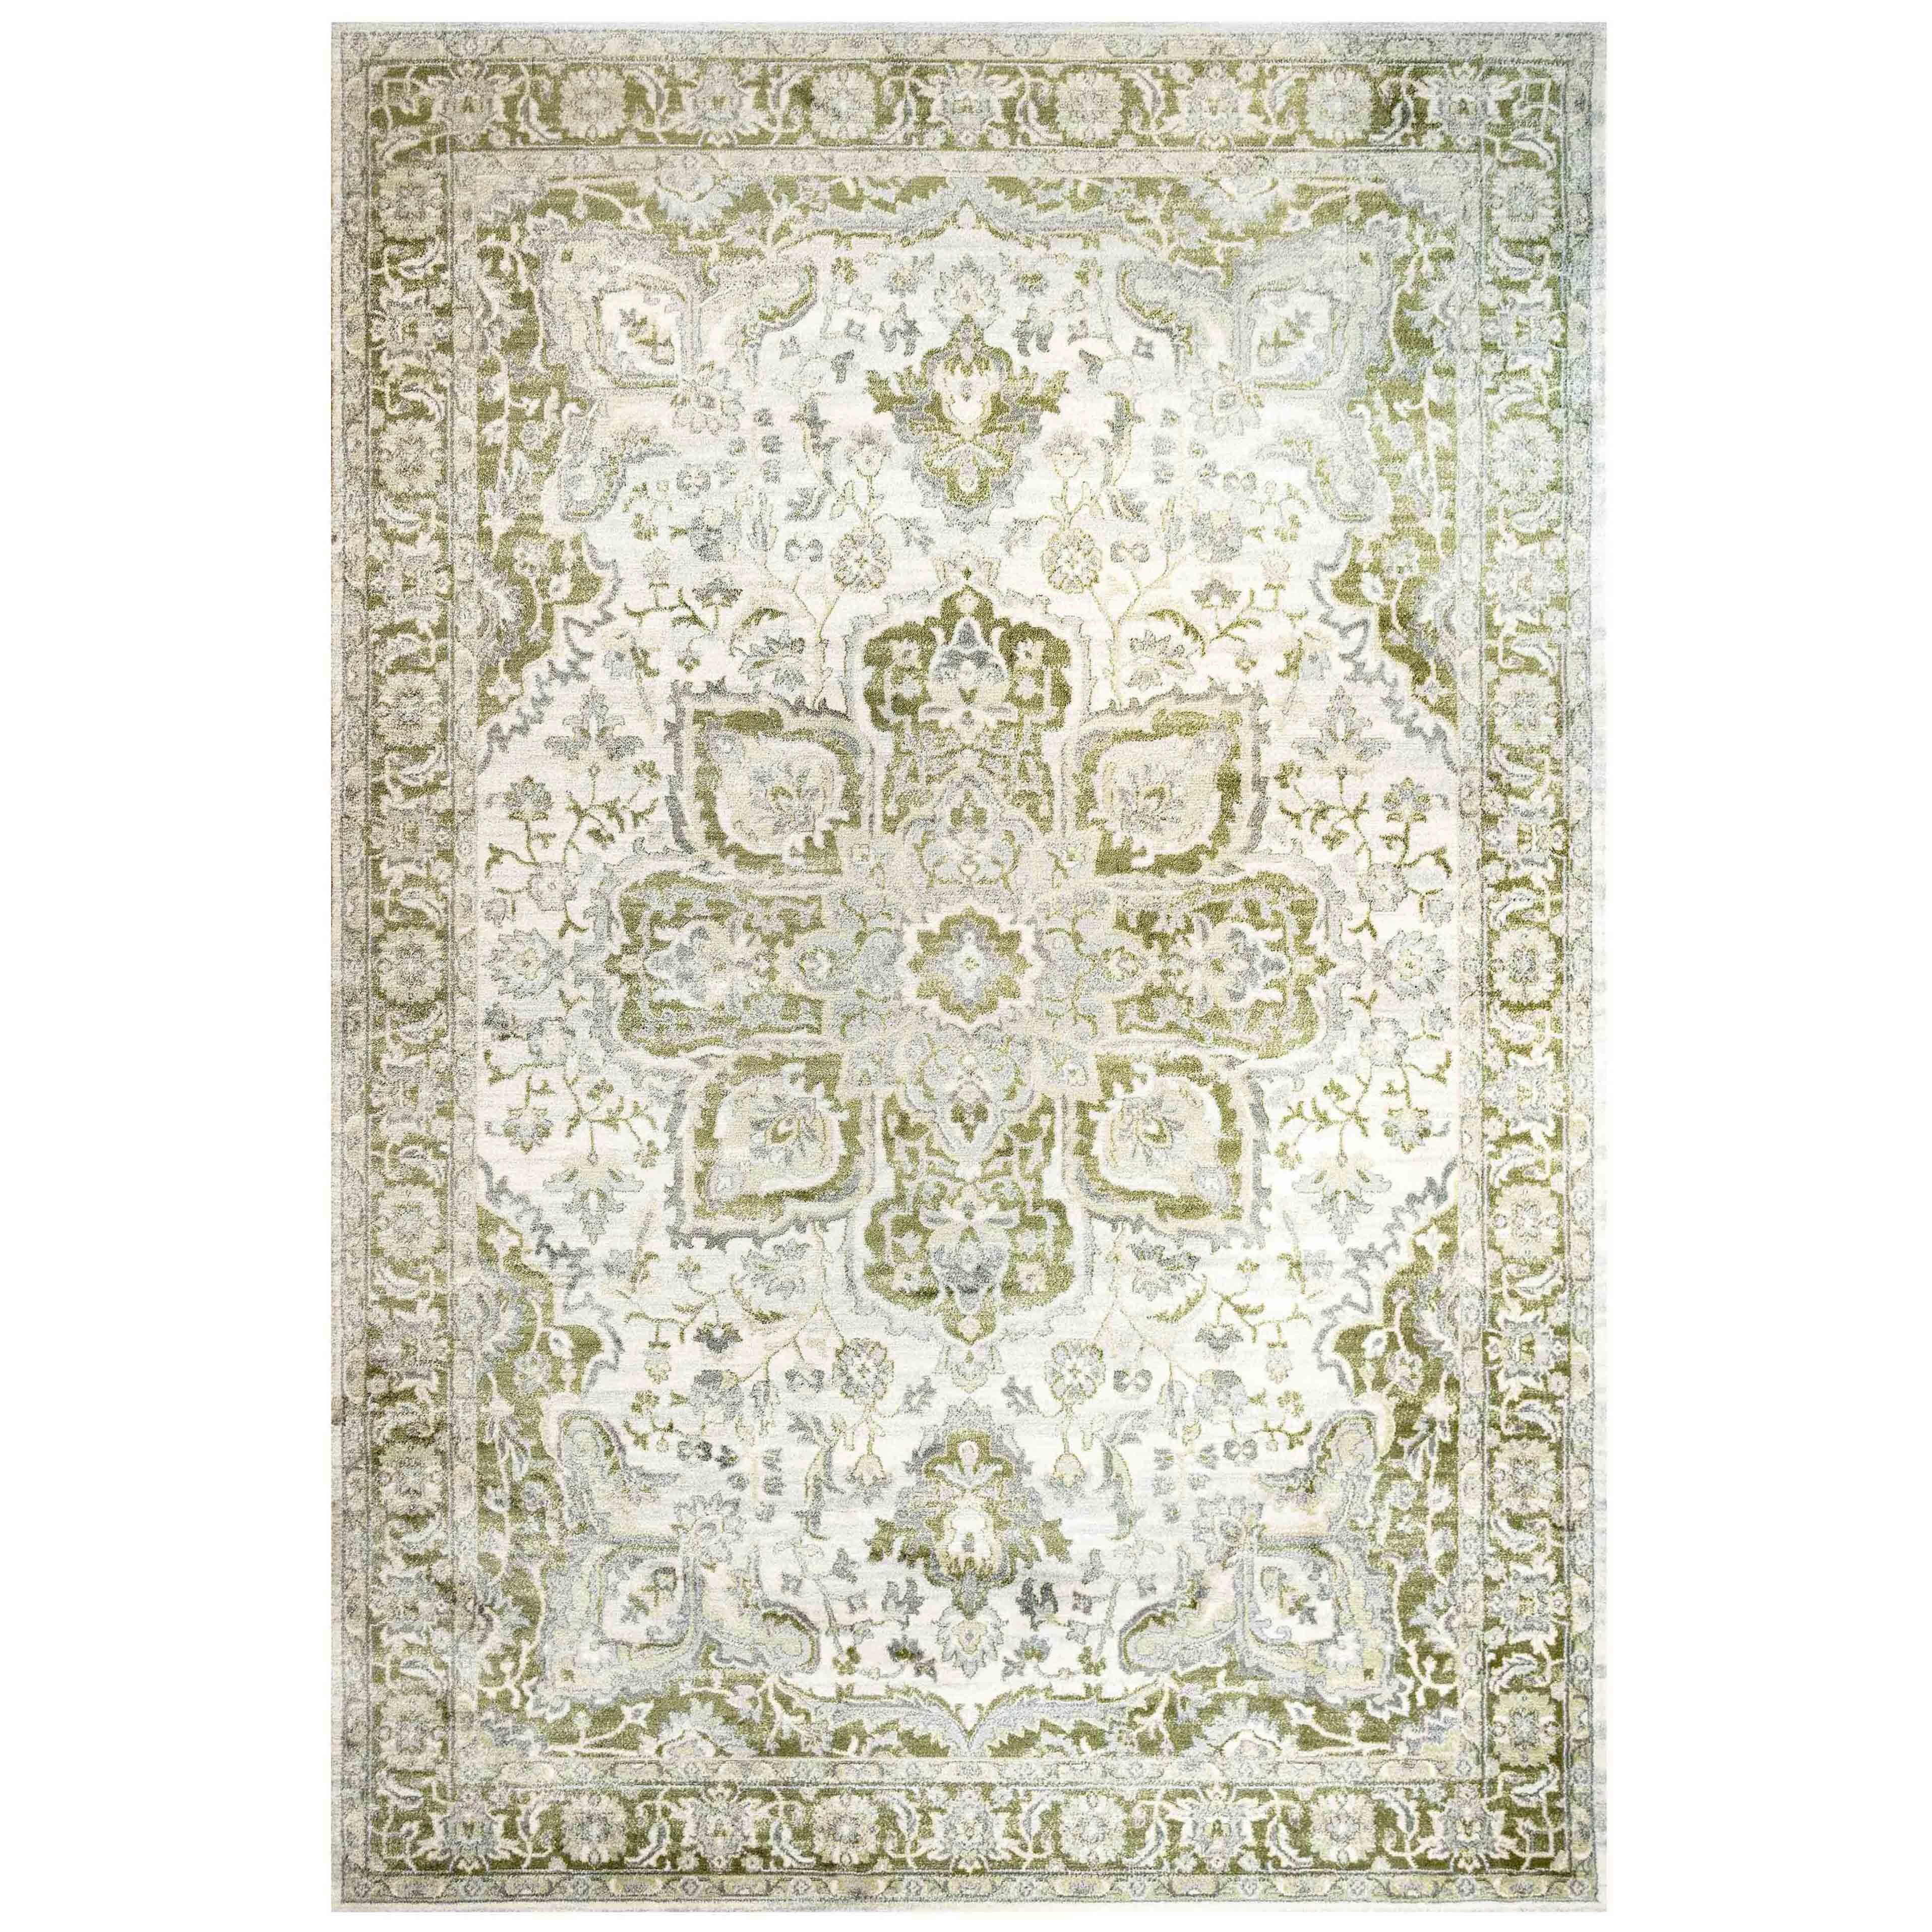 Green Traditional Floral Style Bordered Rug - image 1